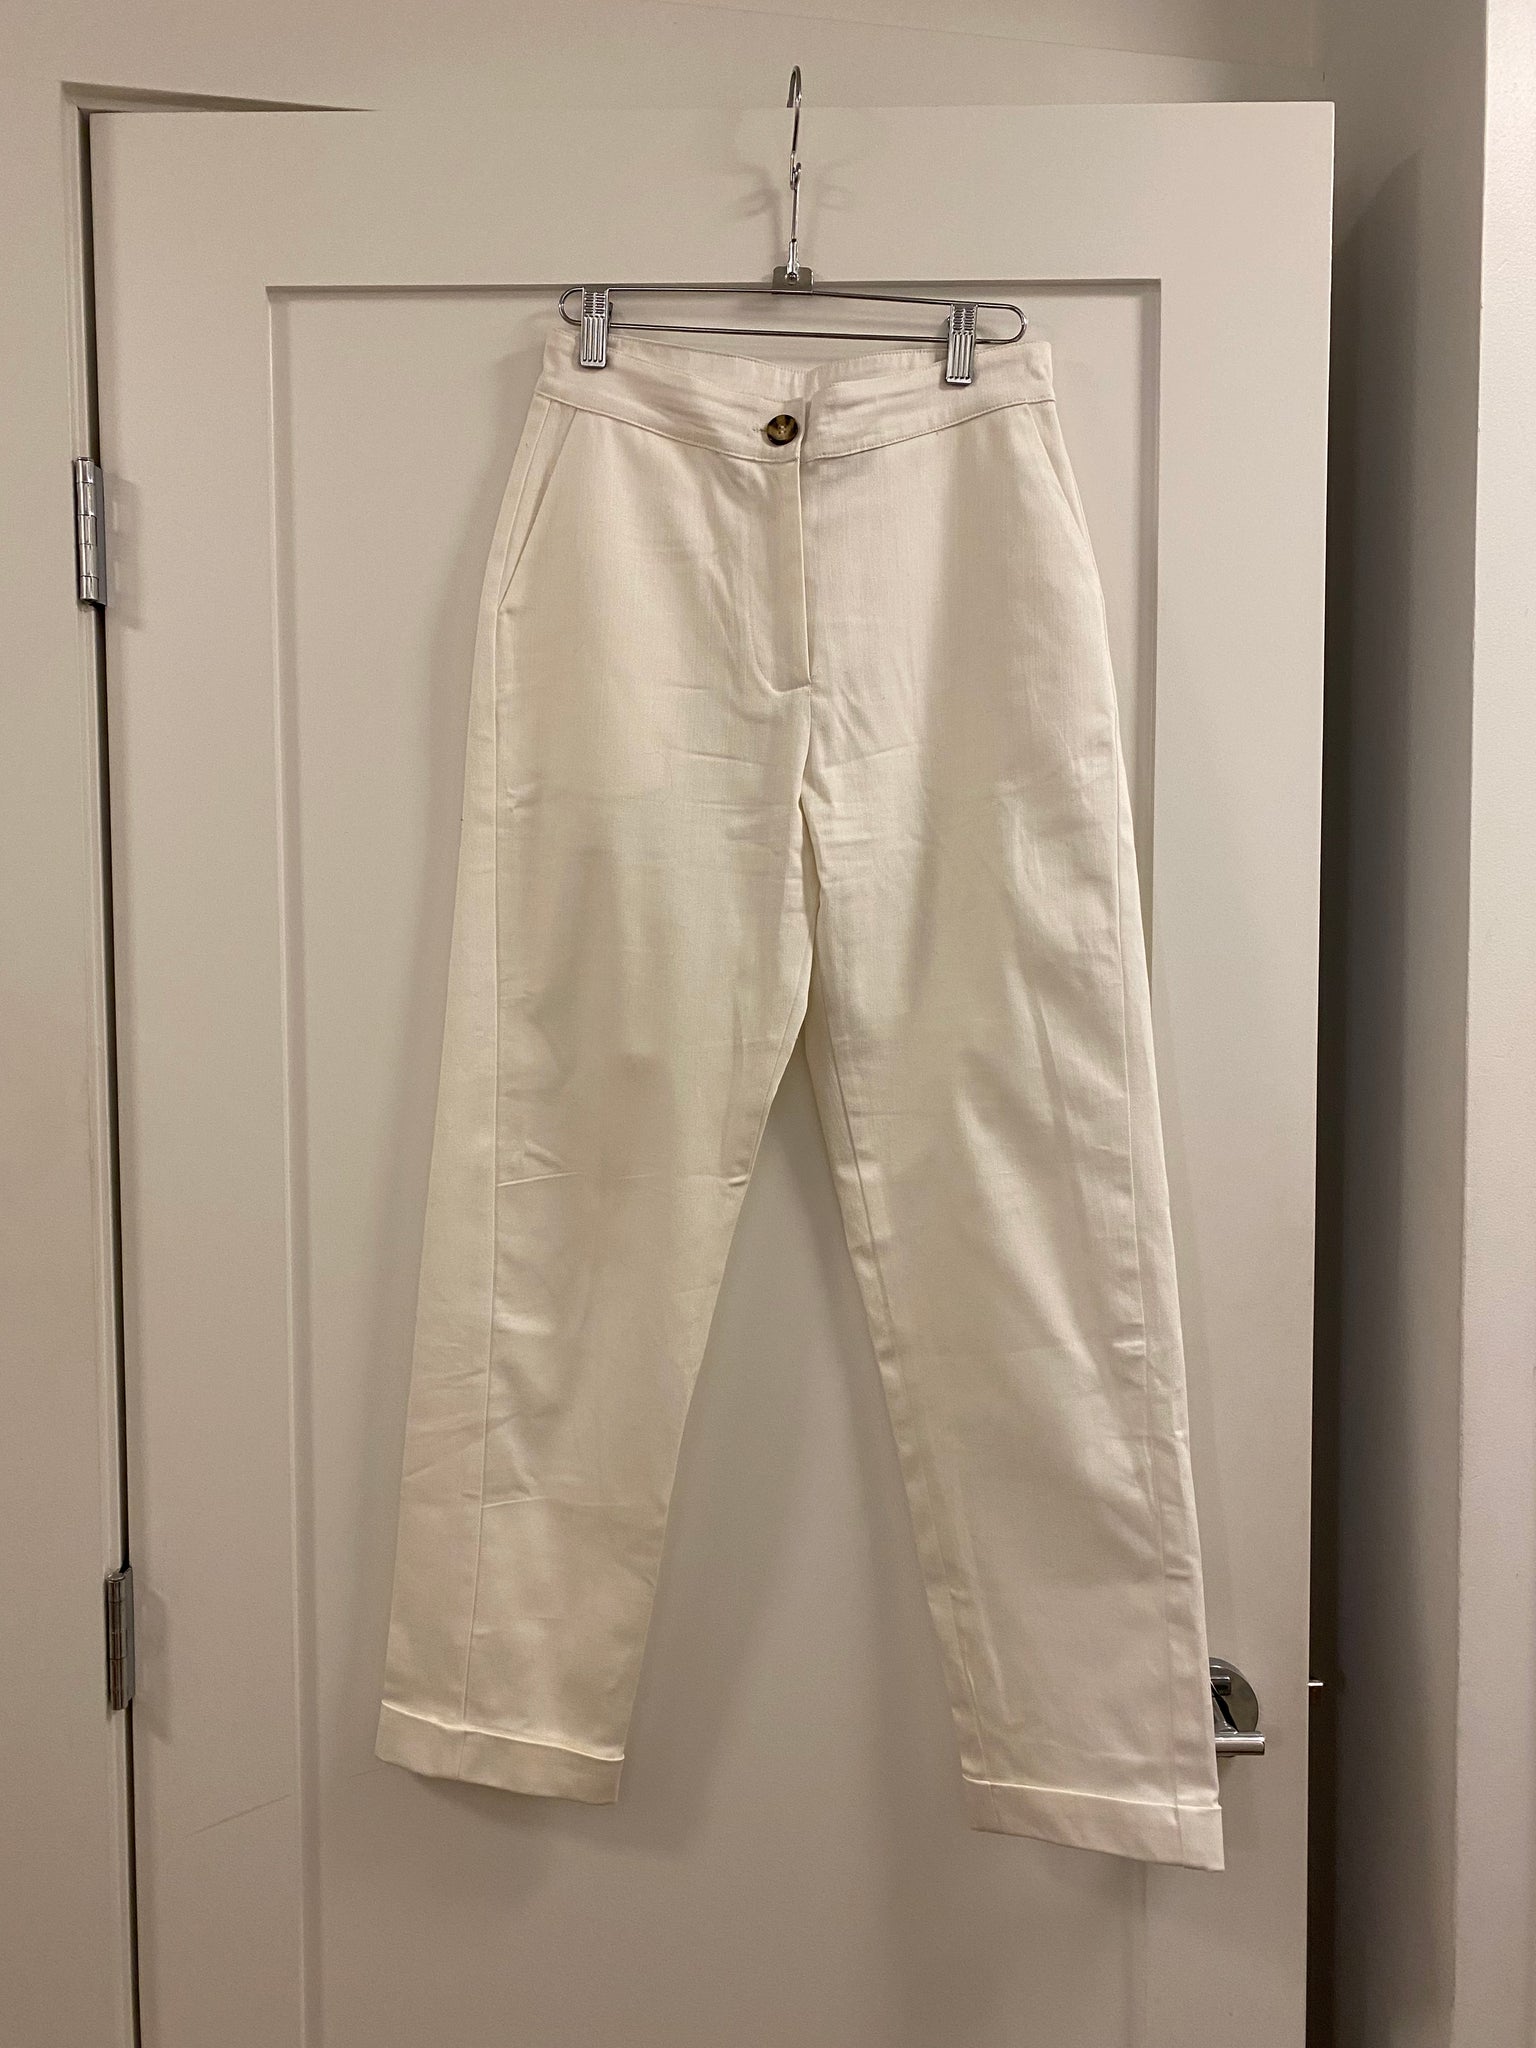 Dayandra Pant in White - Size S